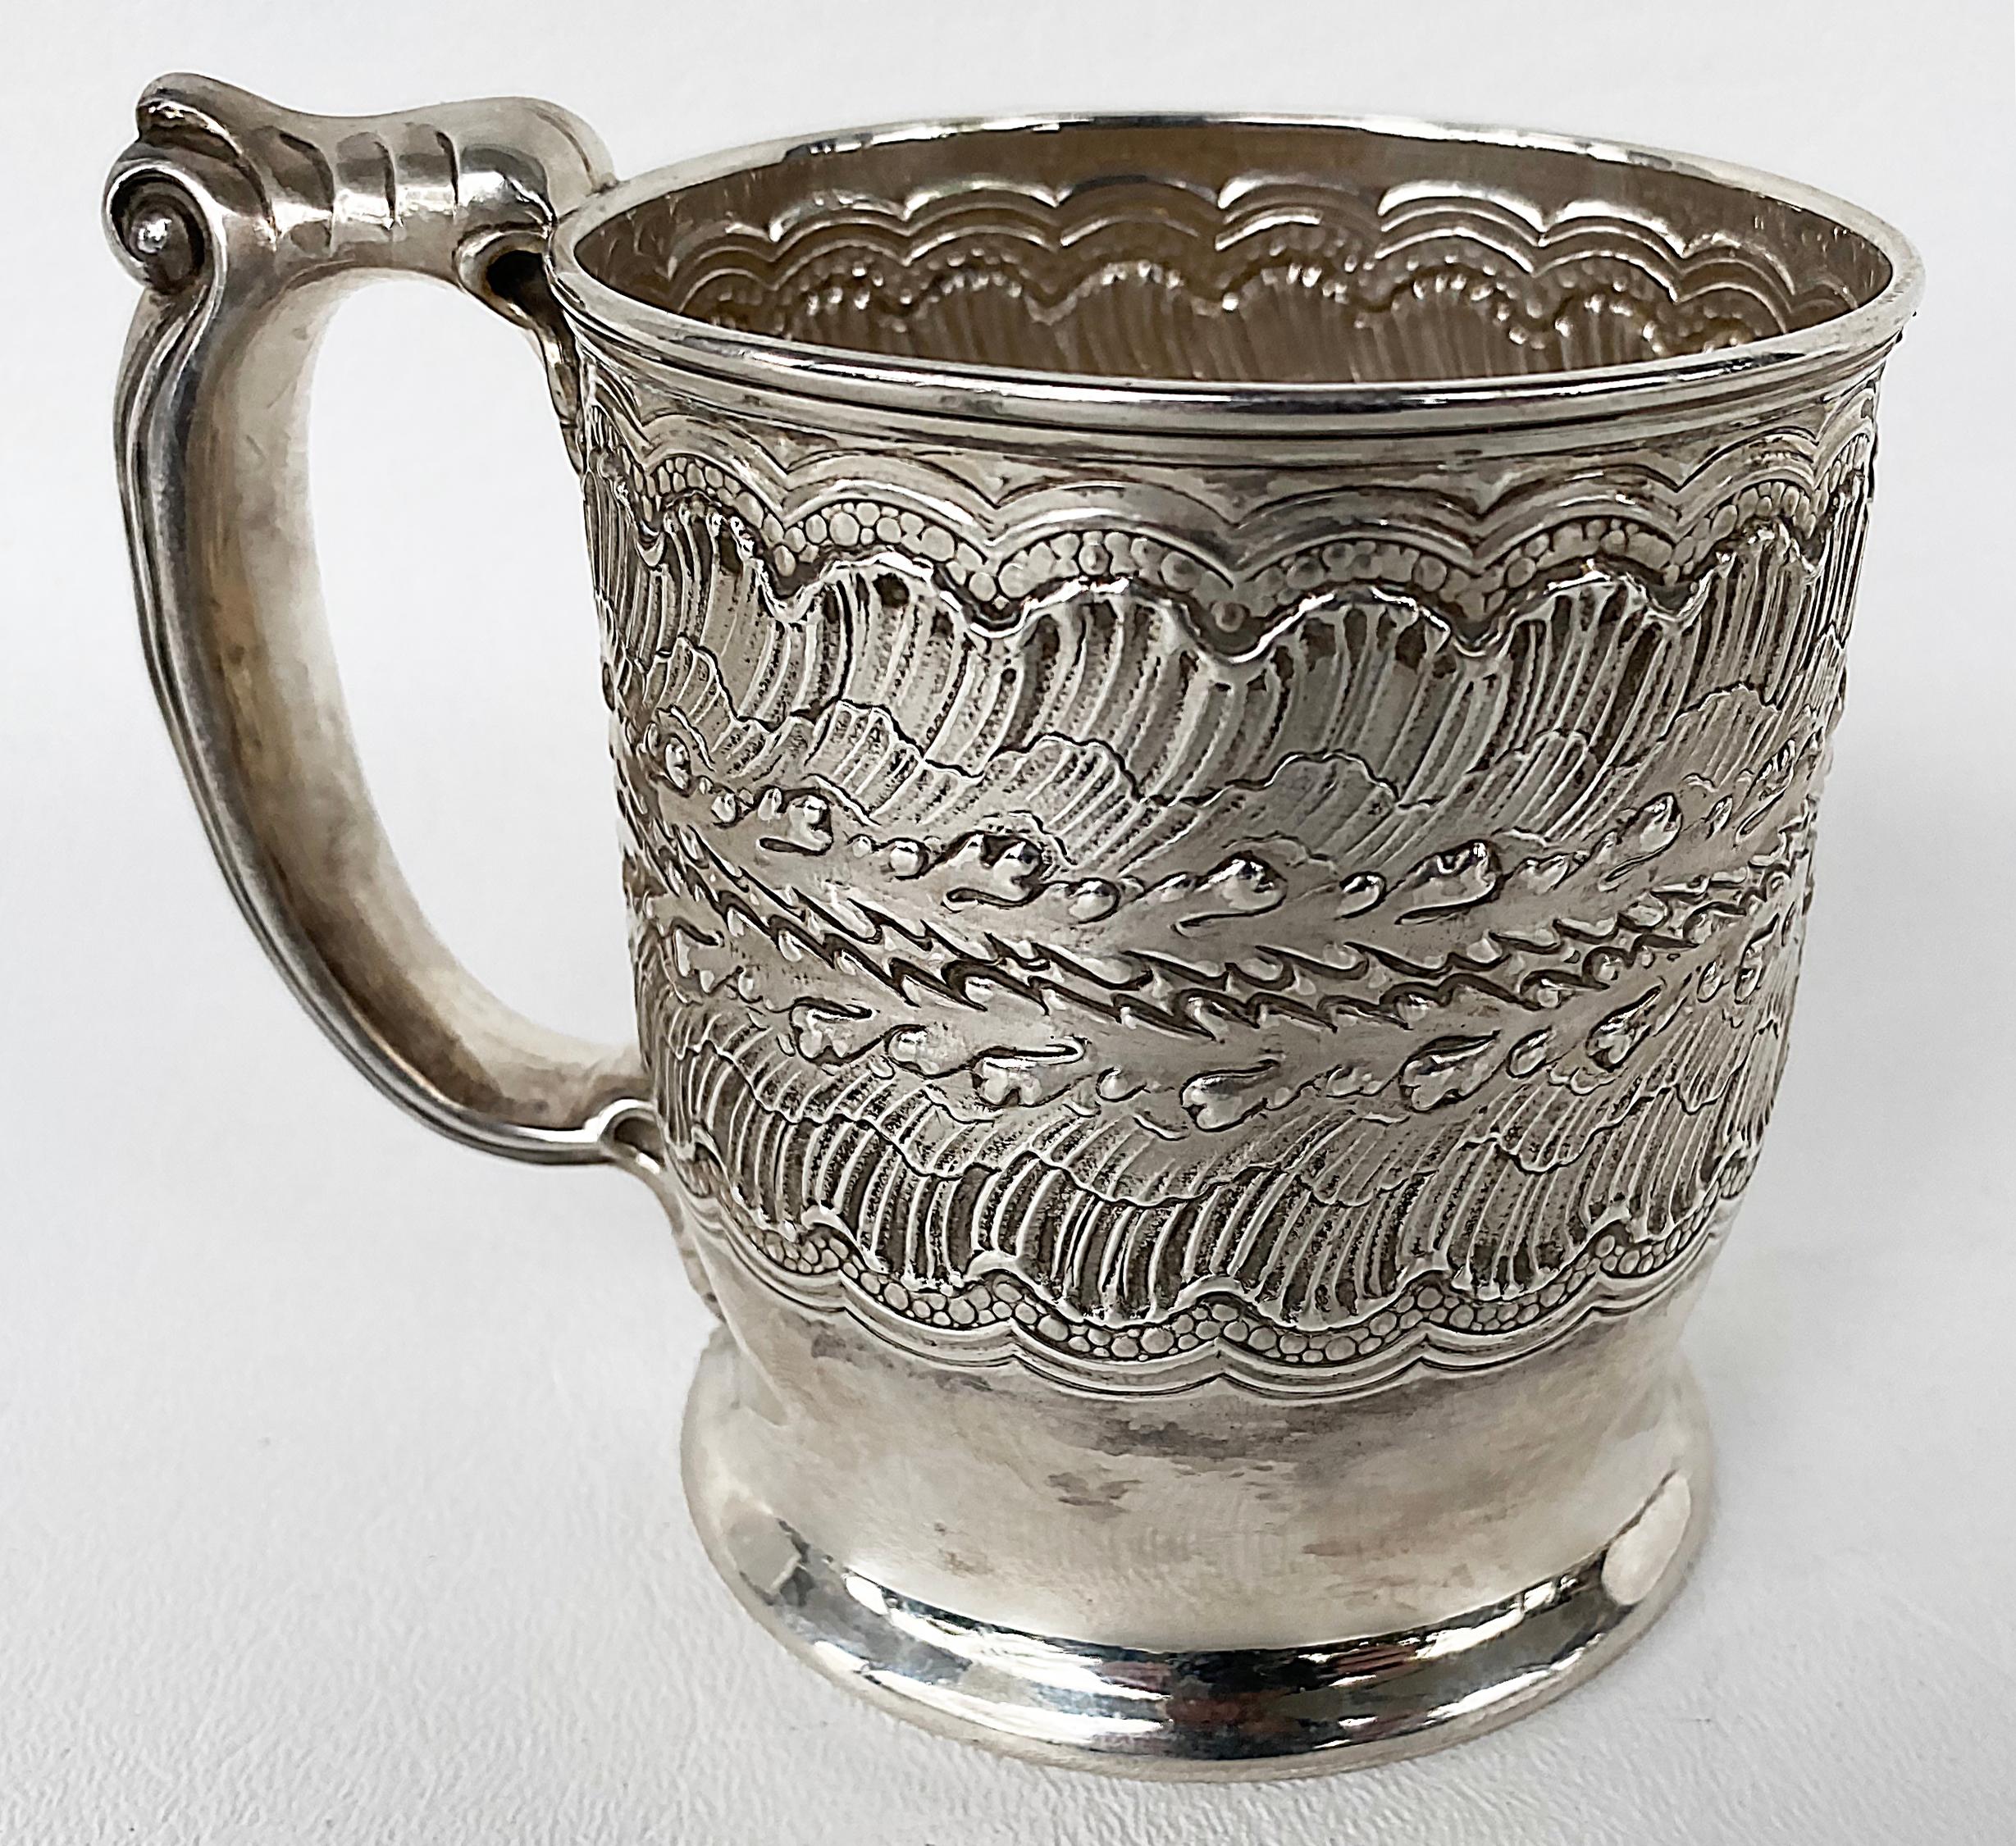 Antique sterling silver Repousse Baby cup with handle, Circa 1900

Offered for sale is an antique sterling silver repousse baby cup with a handle. The repousse is used in conjunction with chasing to create a fan and water pattern that surrounds